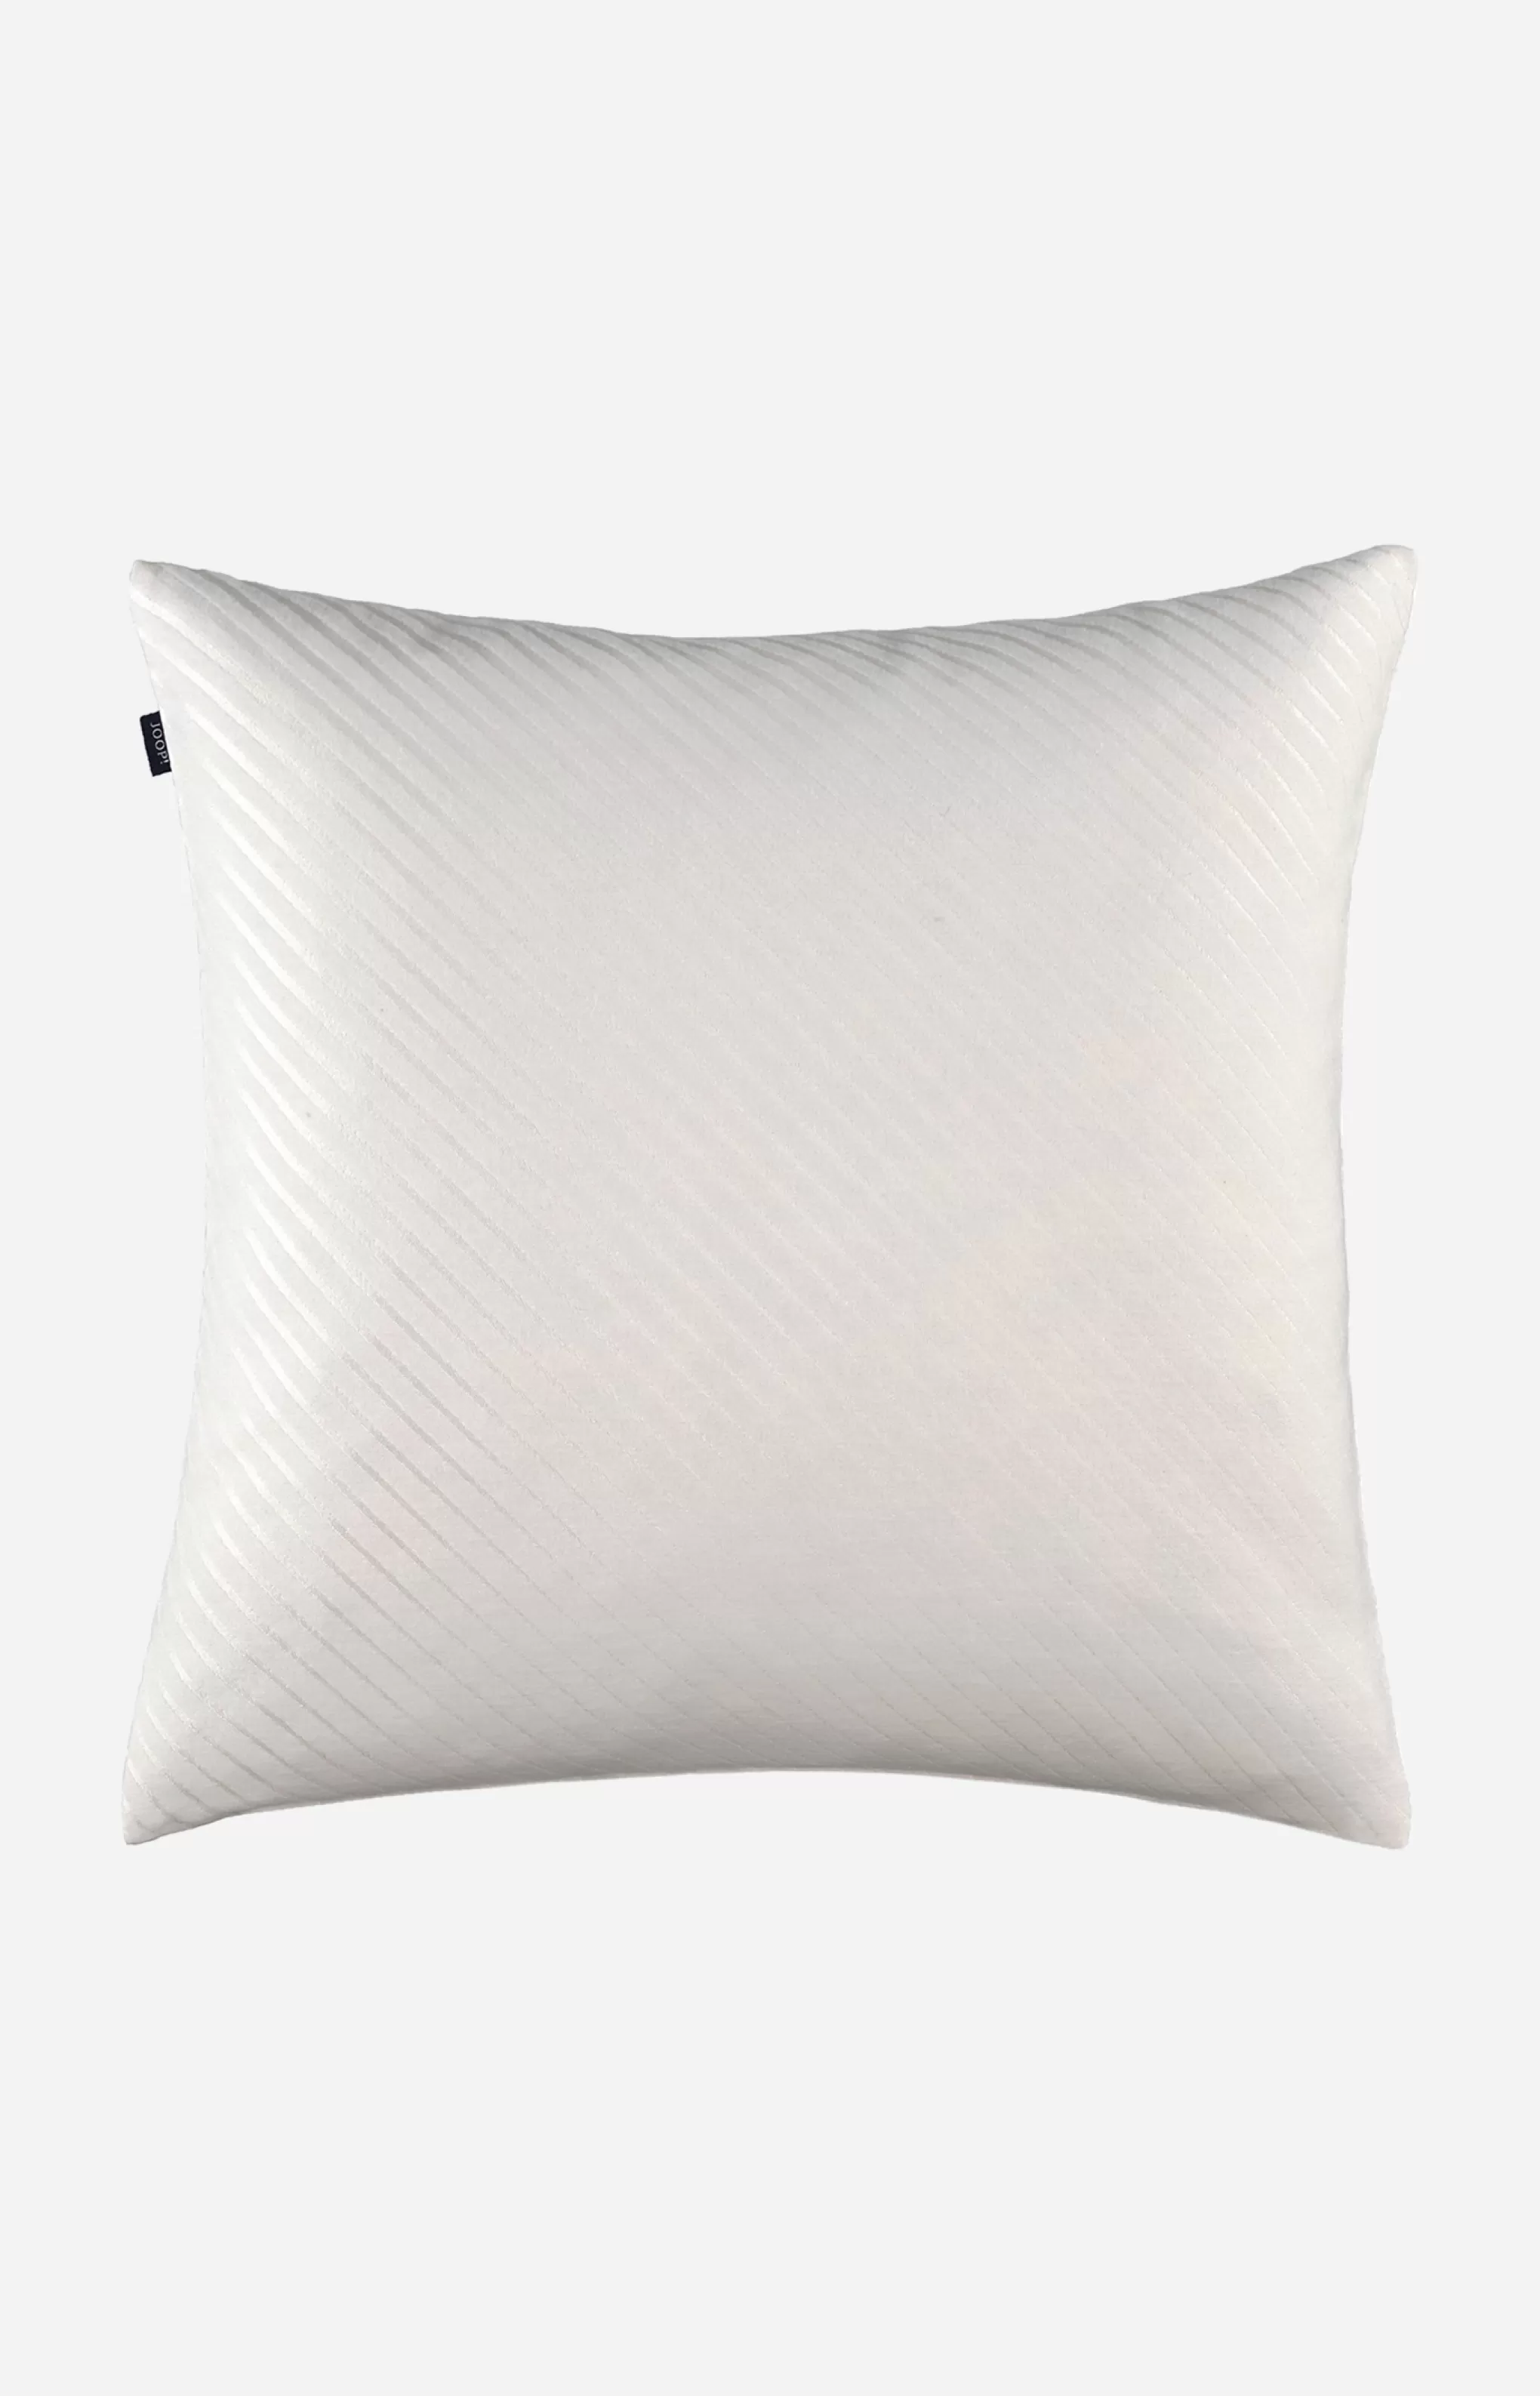 Decorative Cushions | Discover Everything*JOOP Decorative Cushions | Discover Everything ! MODISH Decorative Cushion Cover in